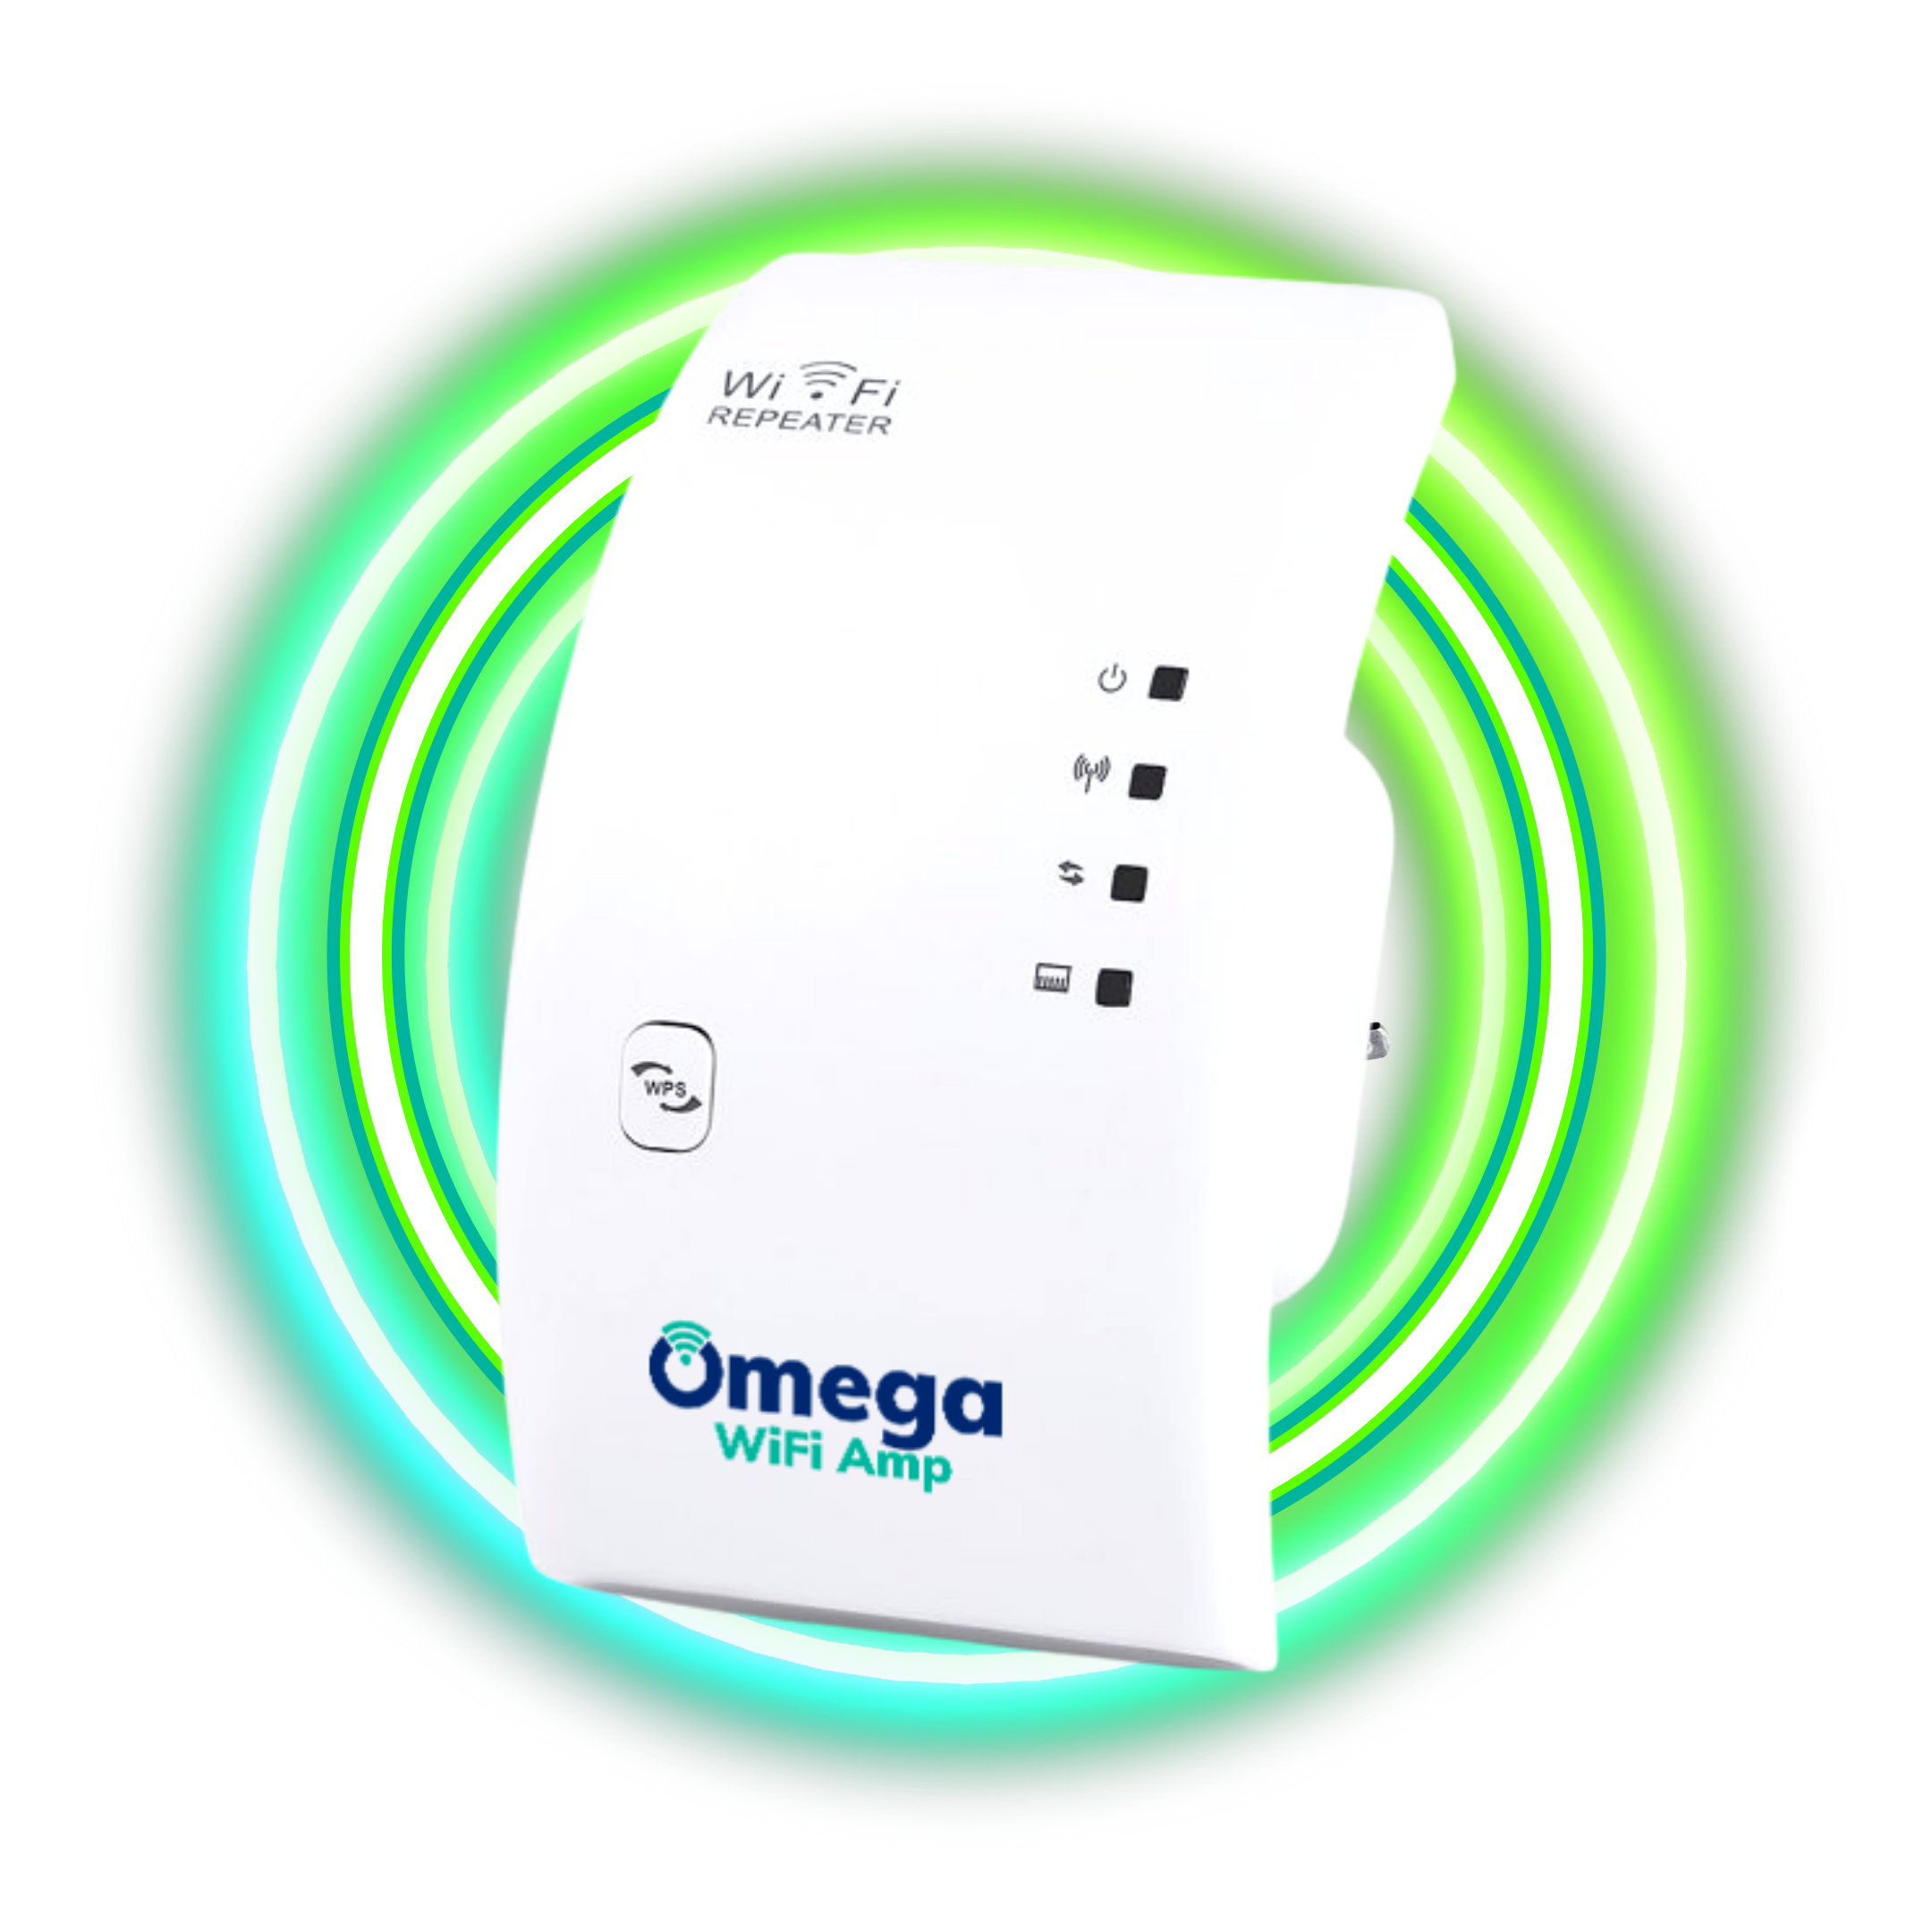 Omega WiFi Amp Reviews - Must Read Before You Buy!